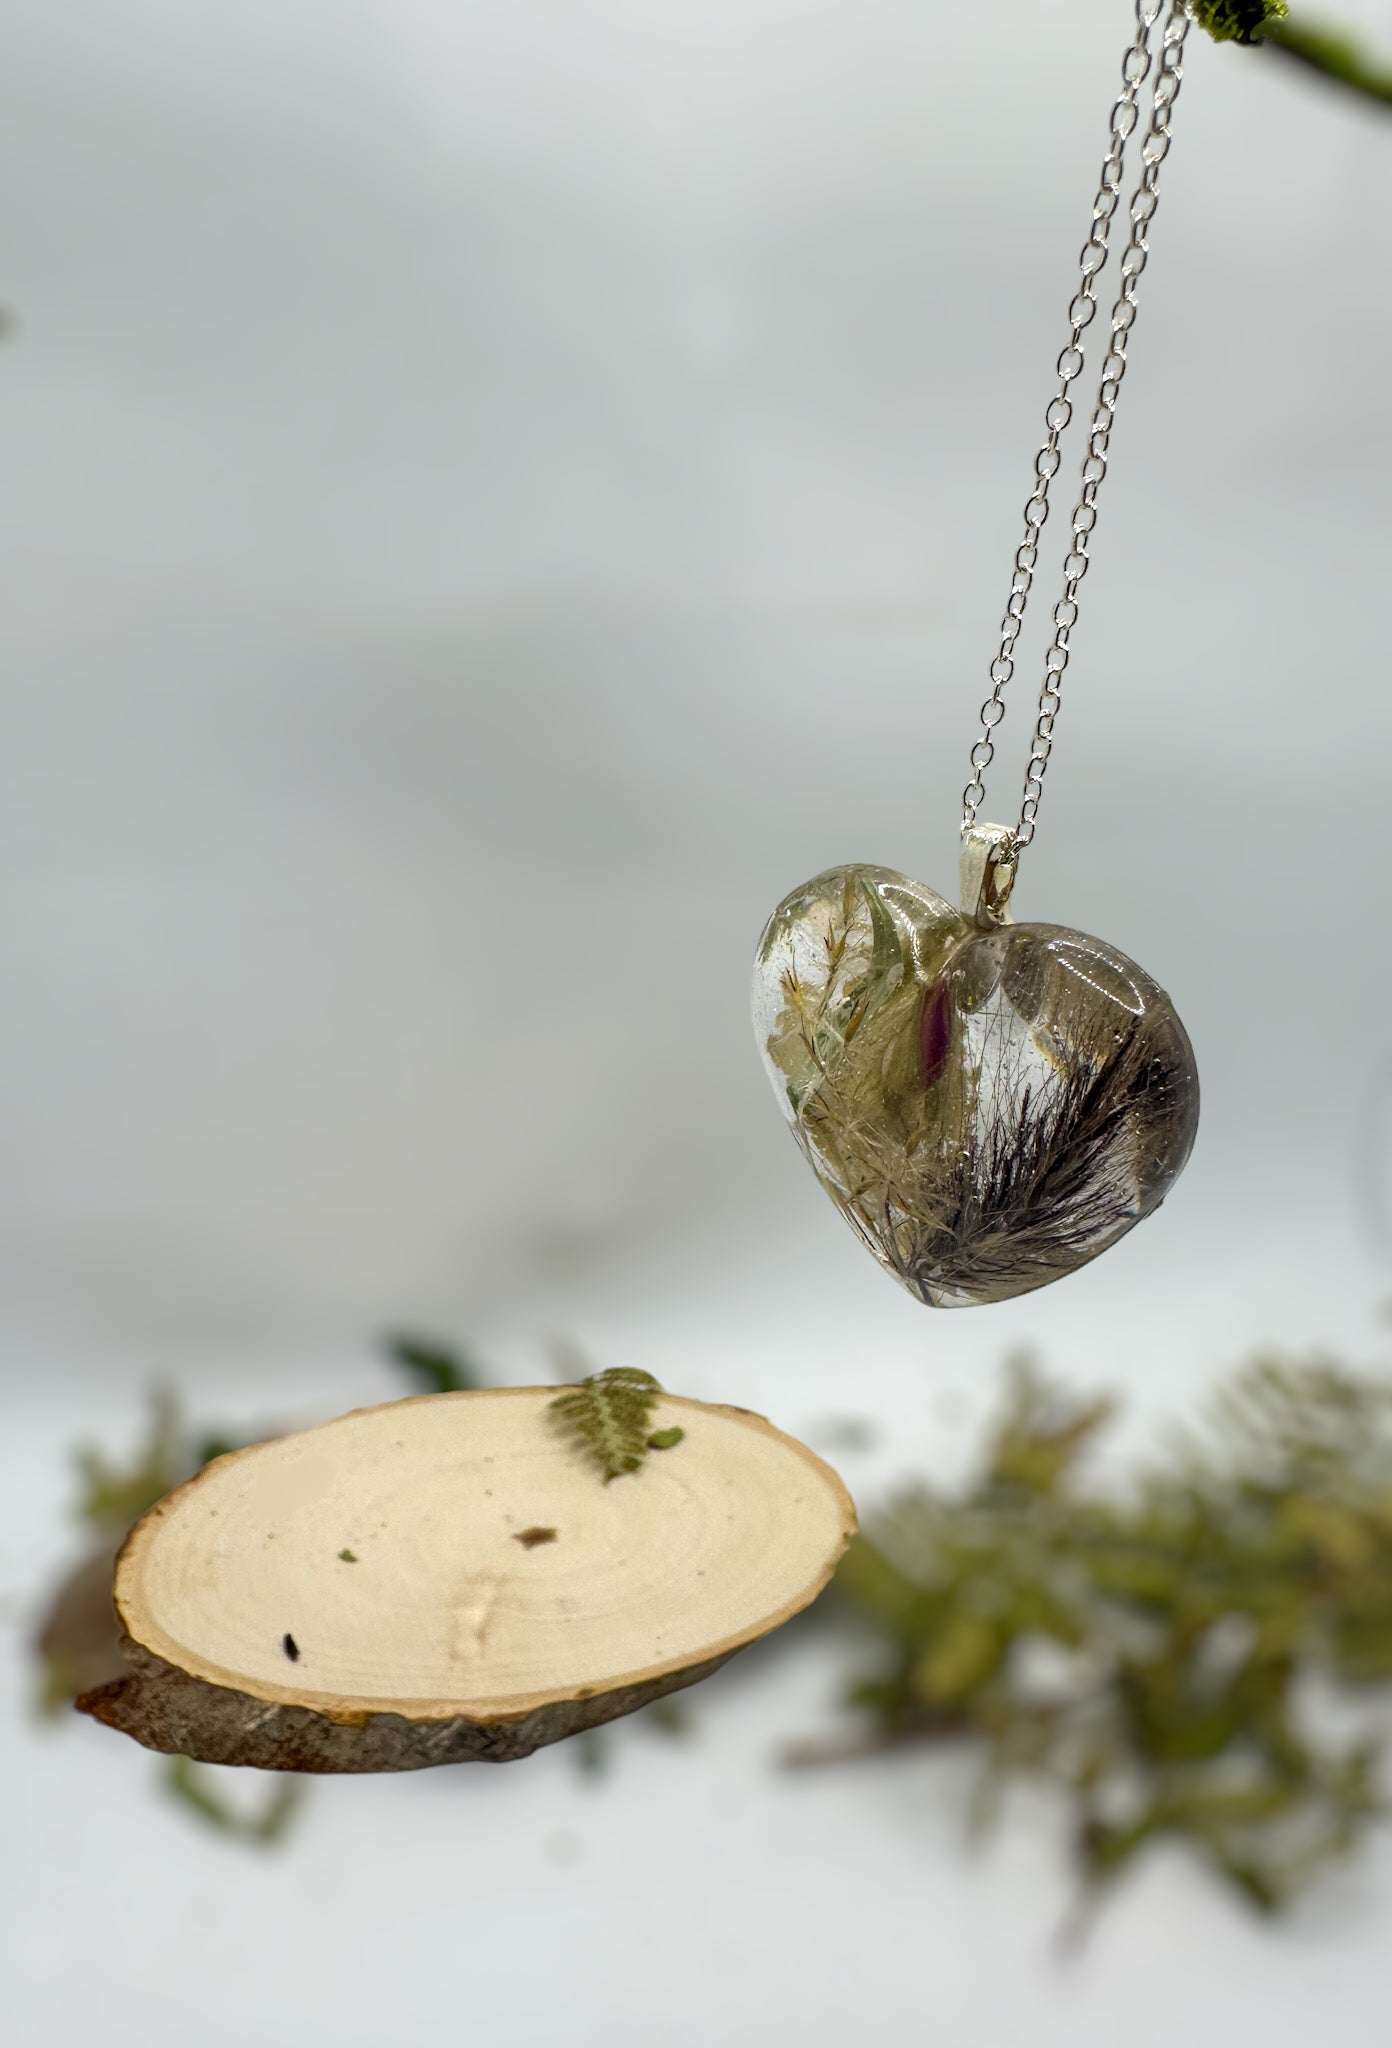 Wild Rose Heart: Handmade Heart Pendant with Wild Rose and Botanicals